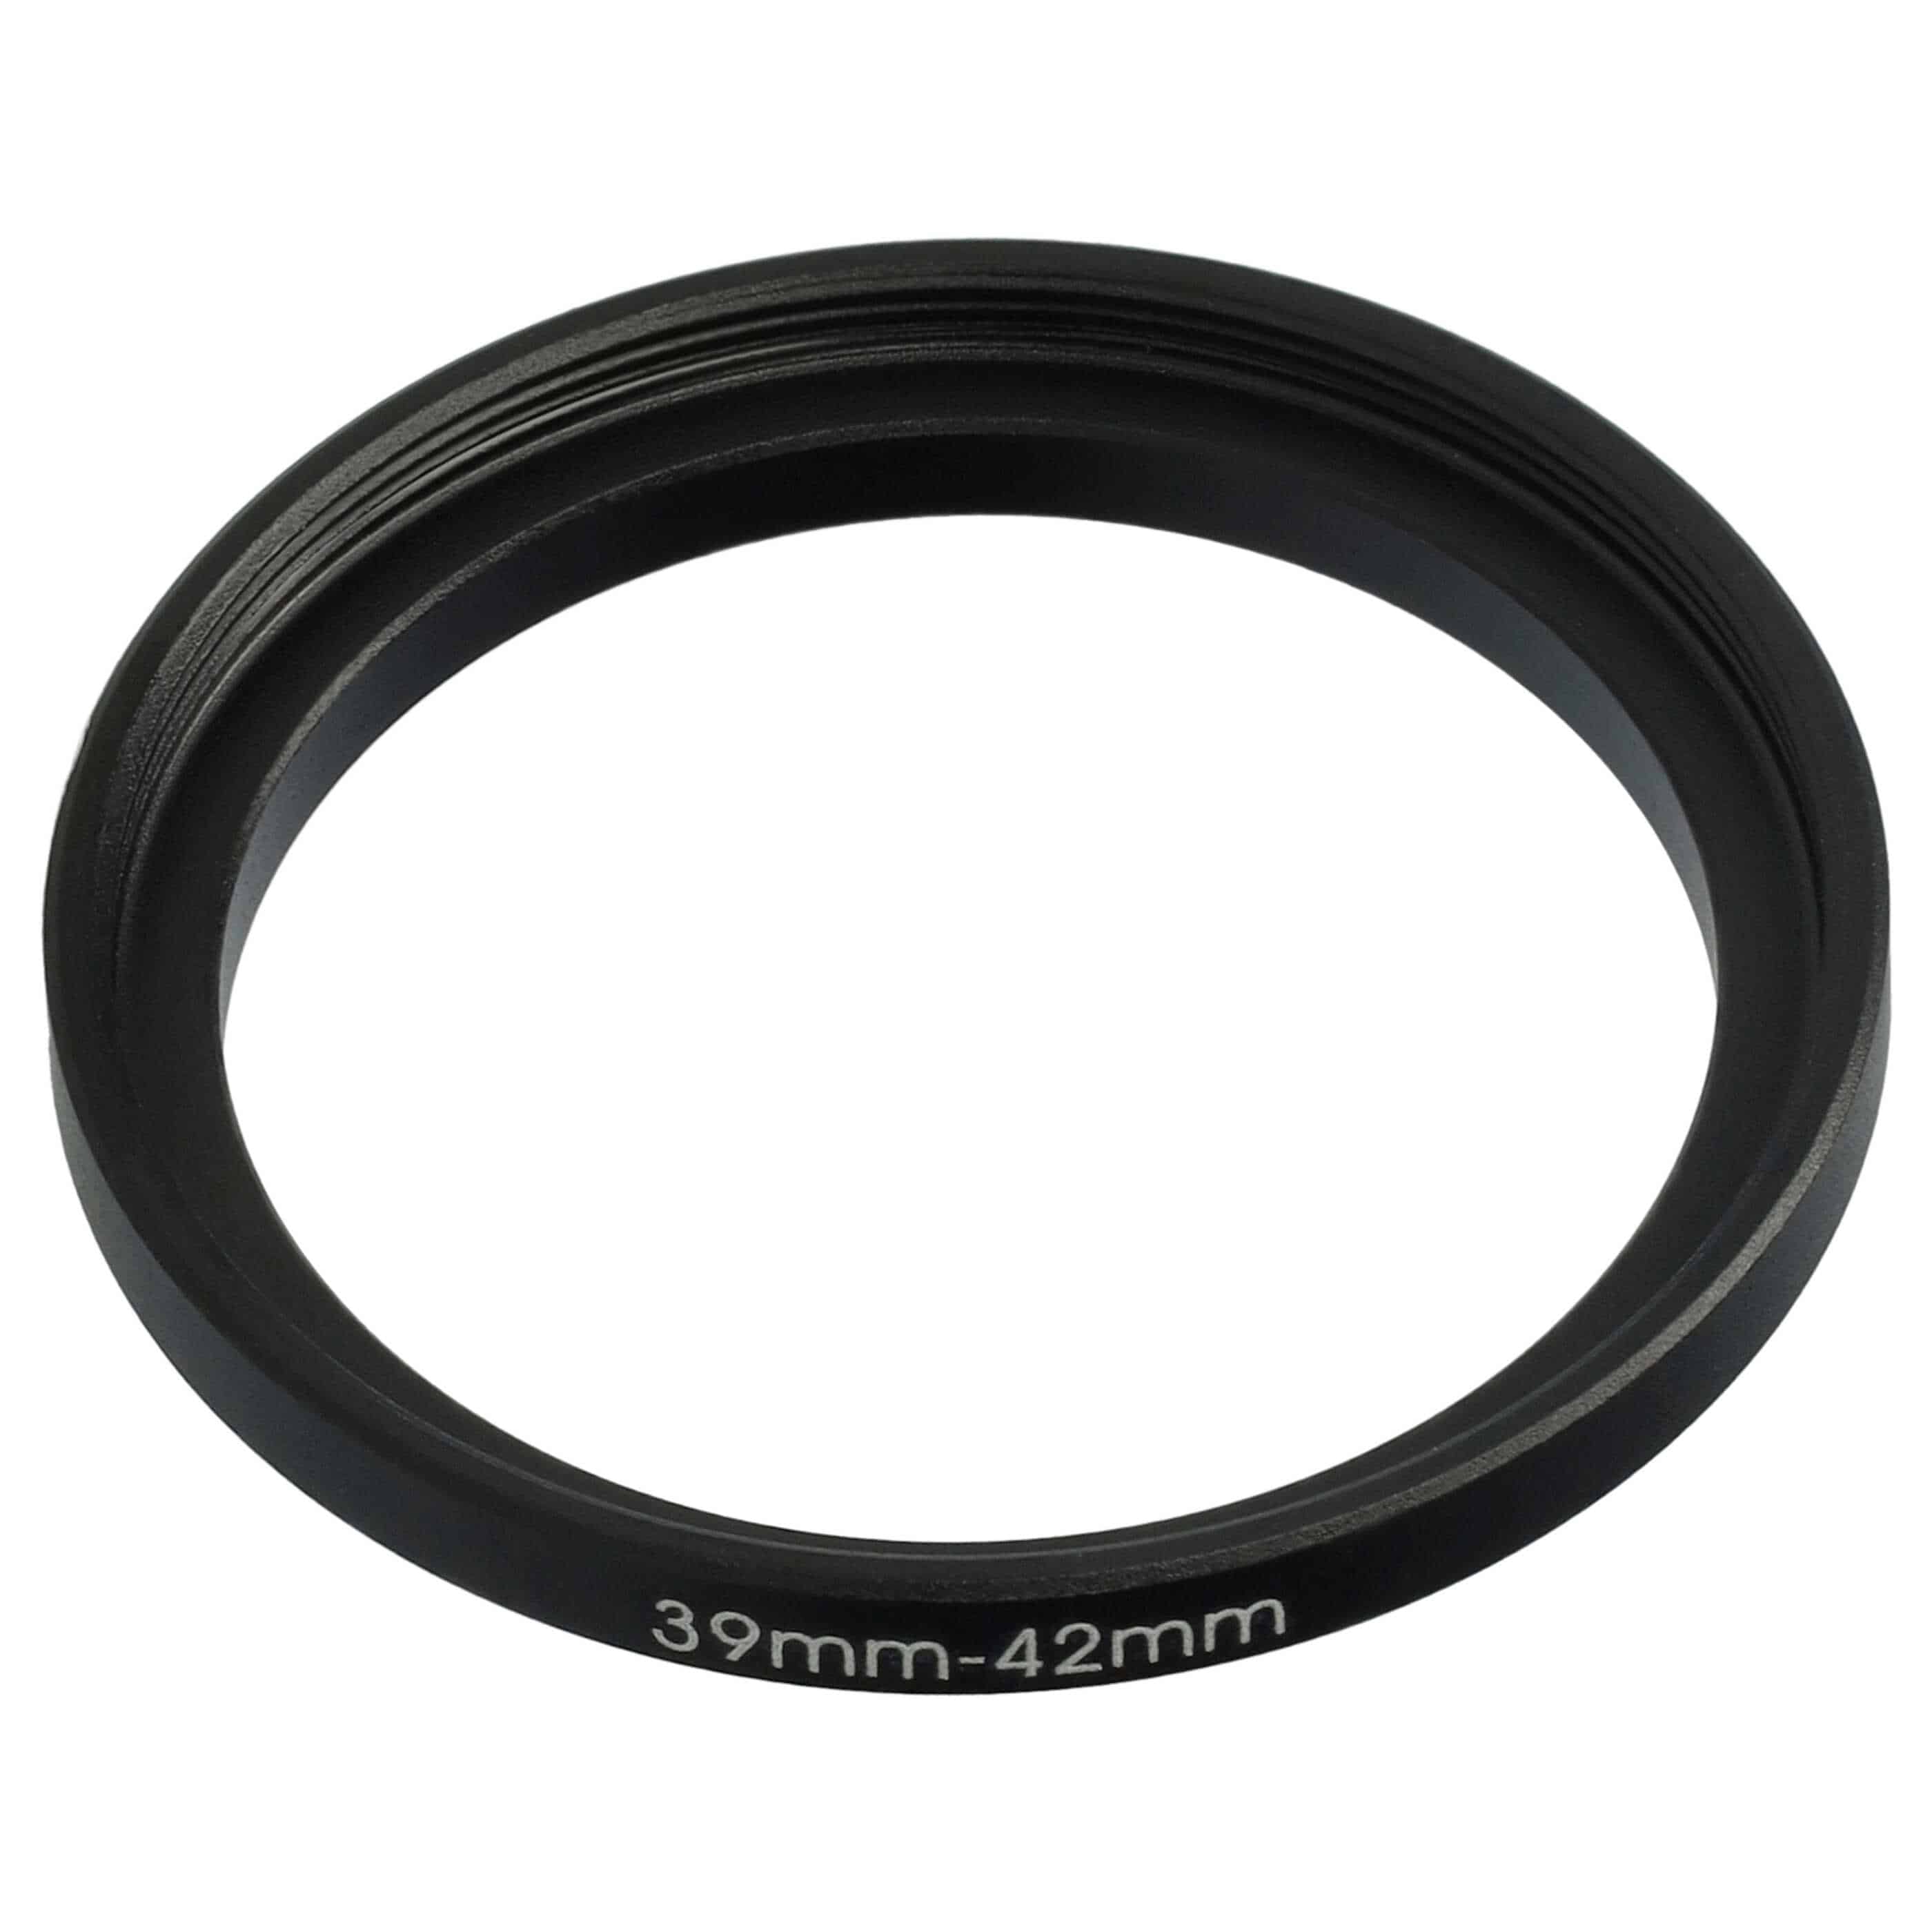 Step-Up Ring Adapter of 39 mm to 42 mmfor various Camera Lens - Filter Adapter